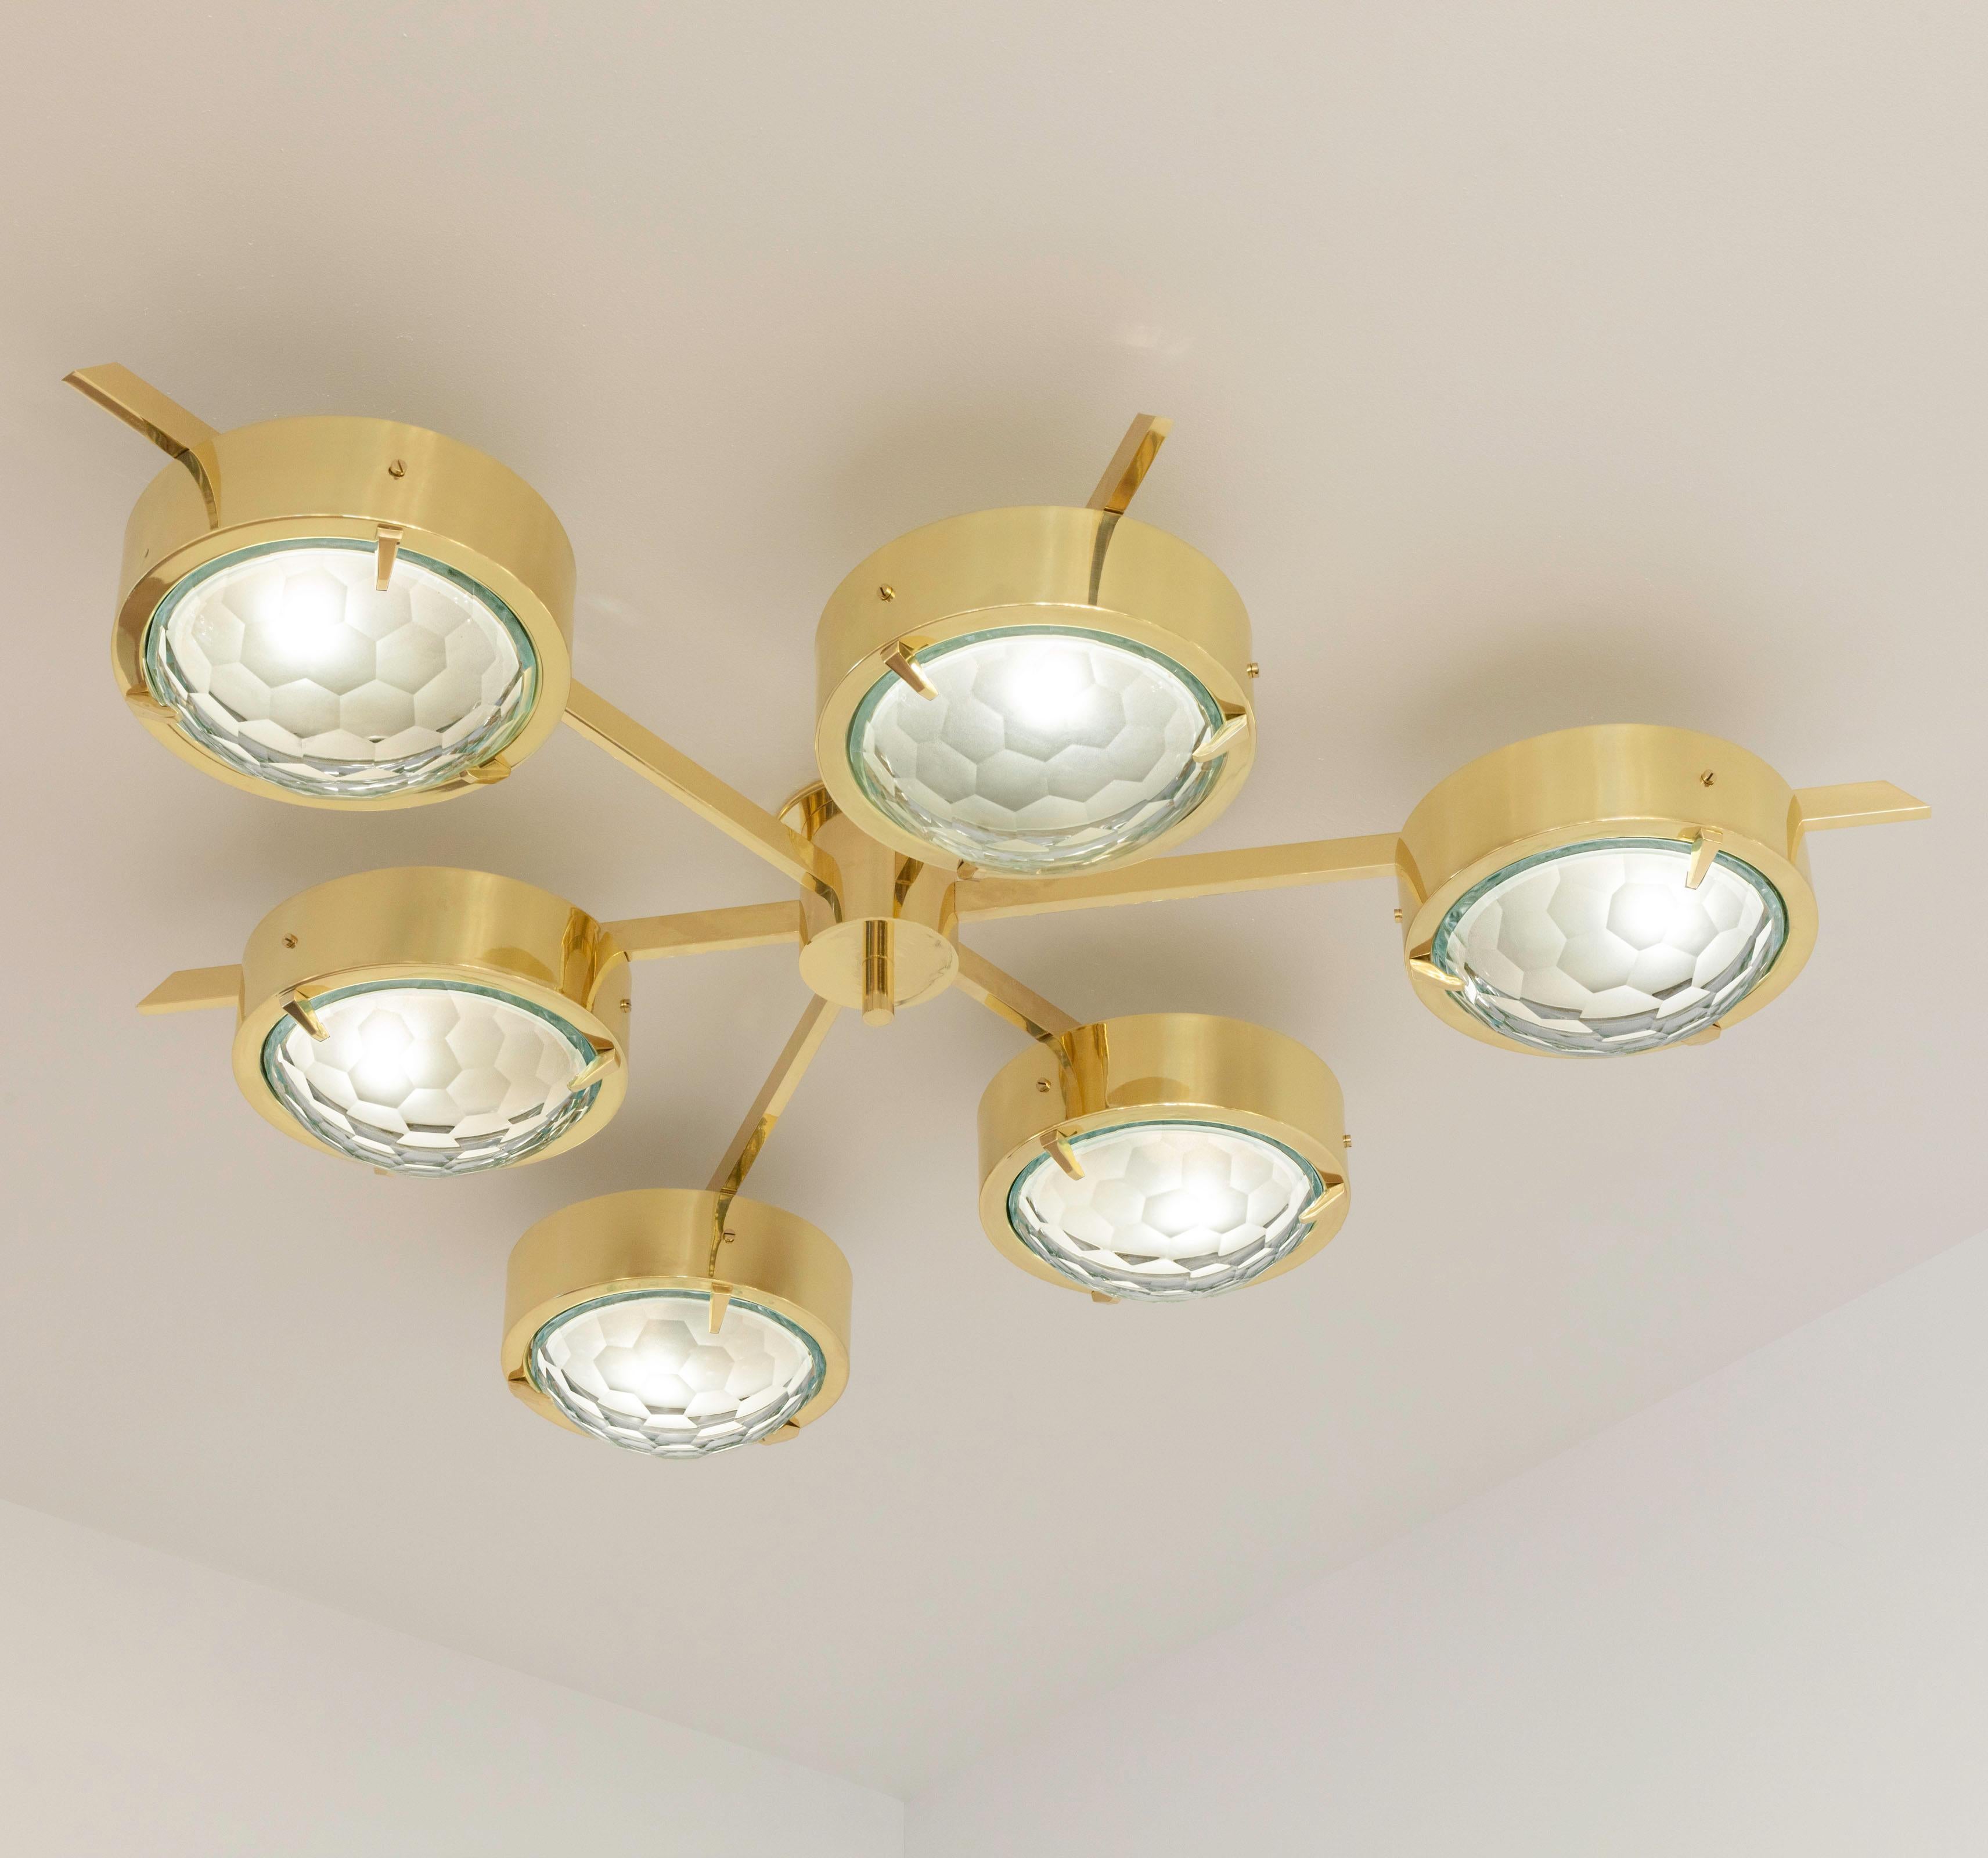 The Stella ceiling light features six shades hand faceted from thick starphire glass, balanced on a star shaped brass frame. Shown as a flush mount in polished brass.

Customization options:
Each fixture is hand crafted in Italy and can be